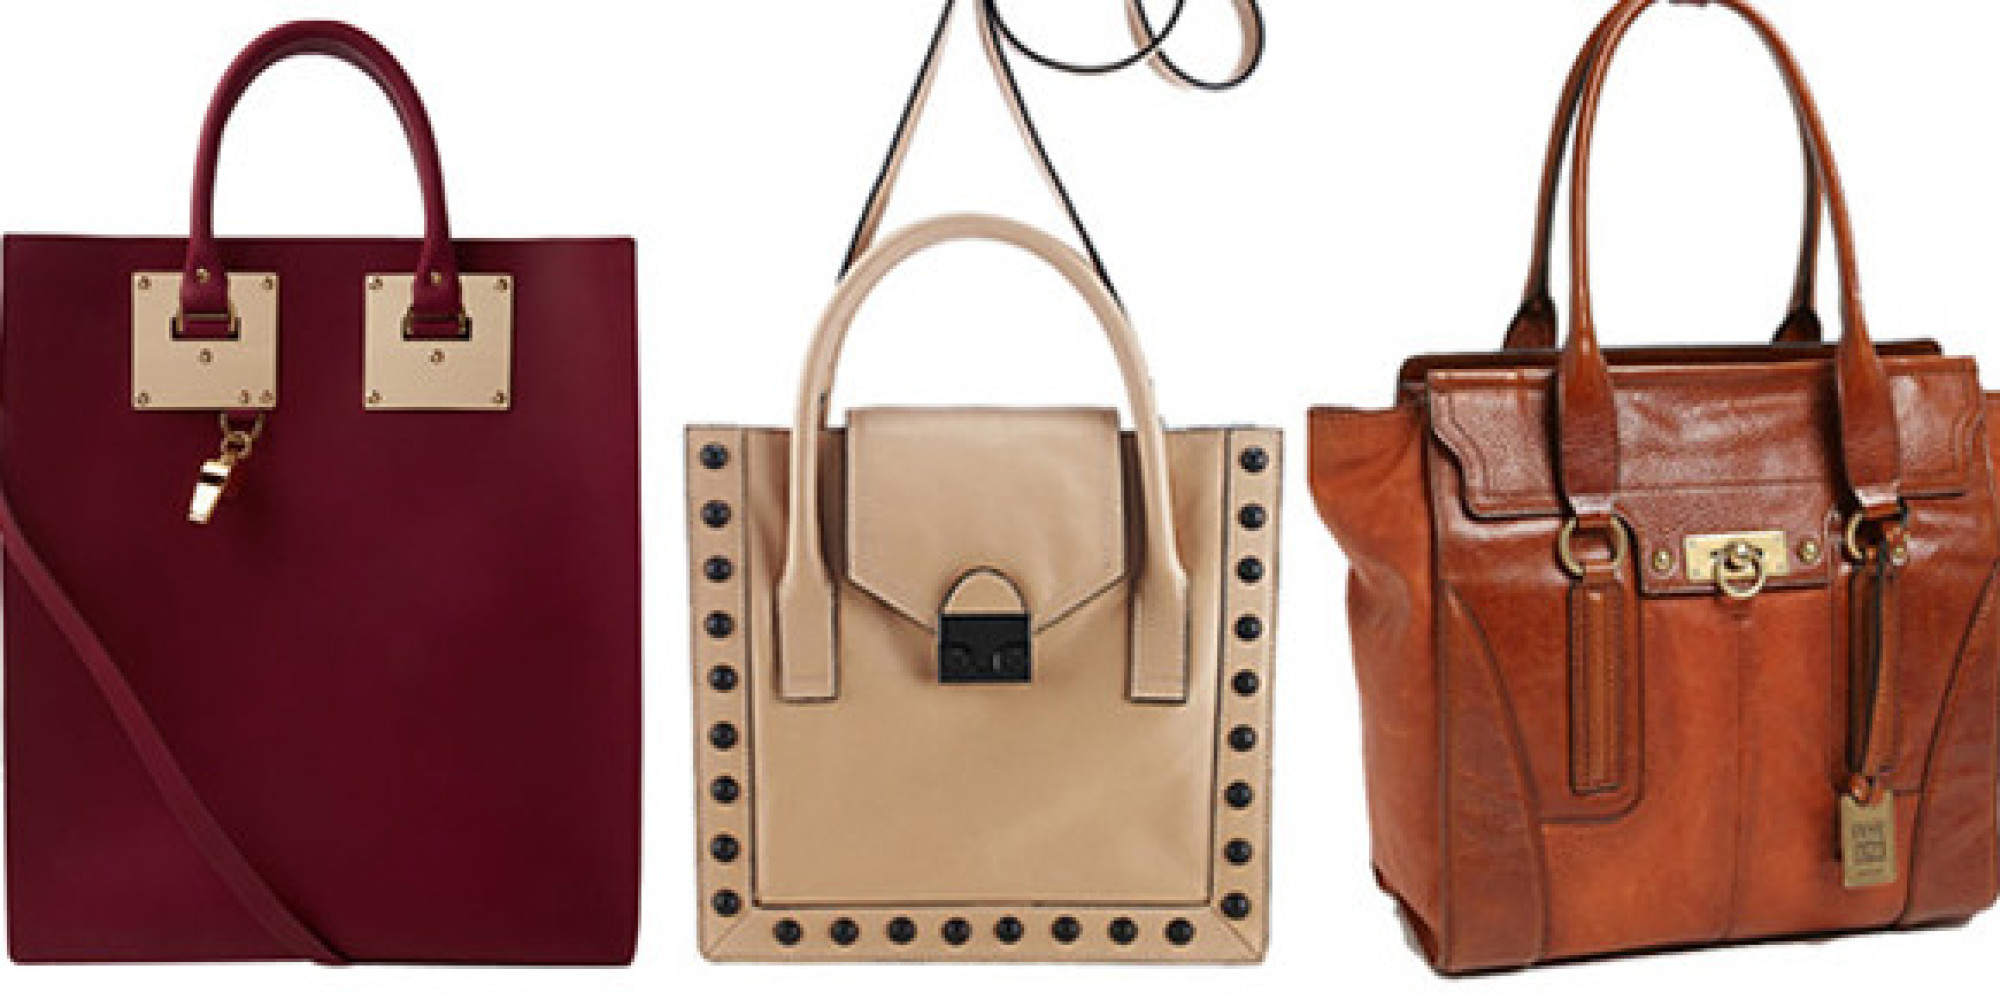 20 Gorgeous Work Bags For Every Office & Budget | HuffPost